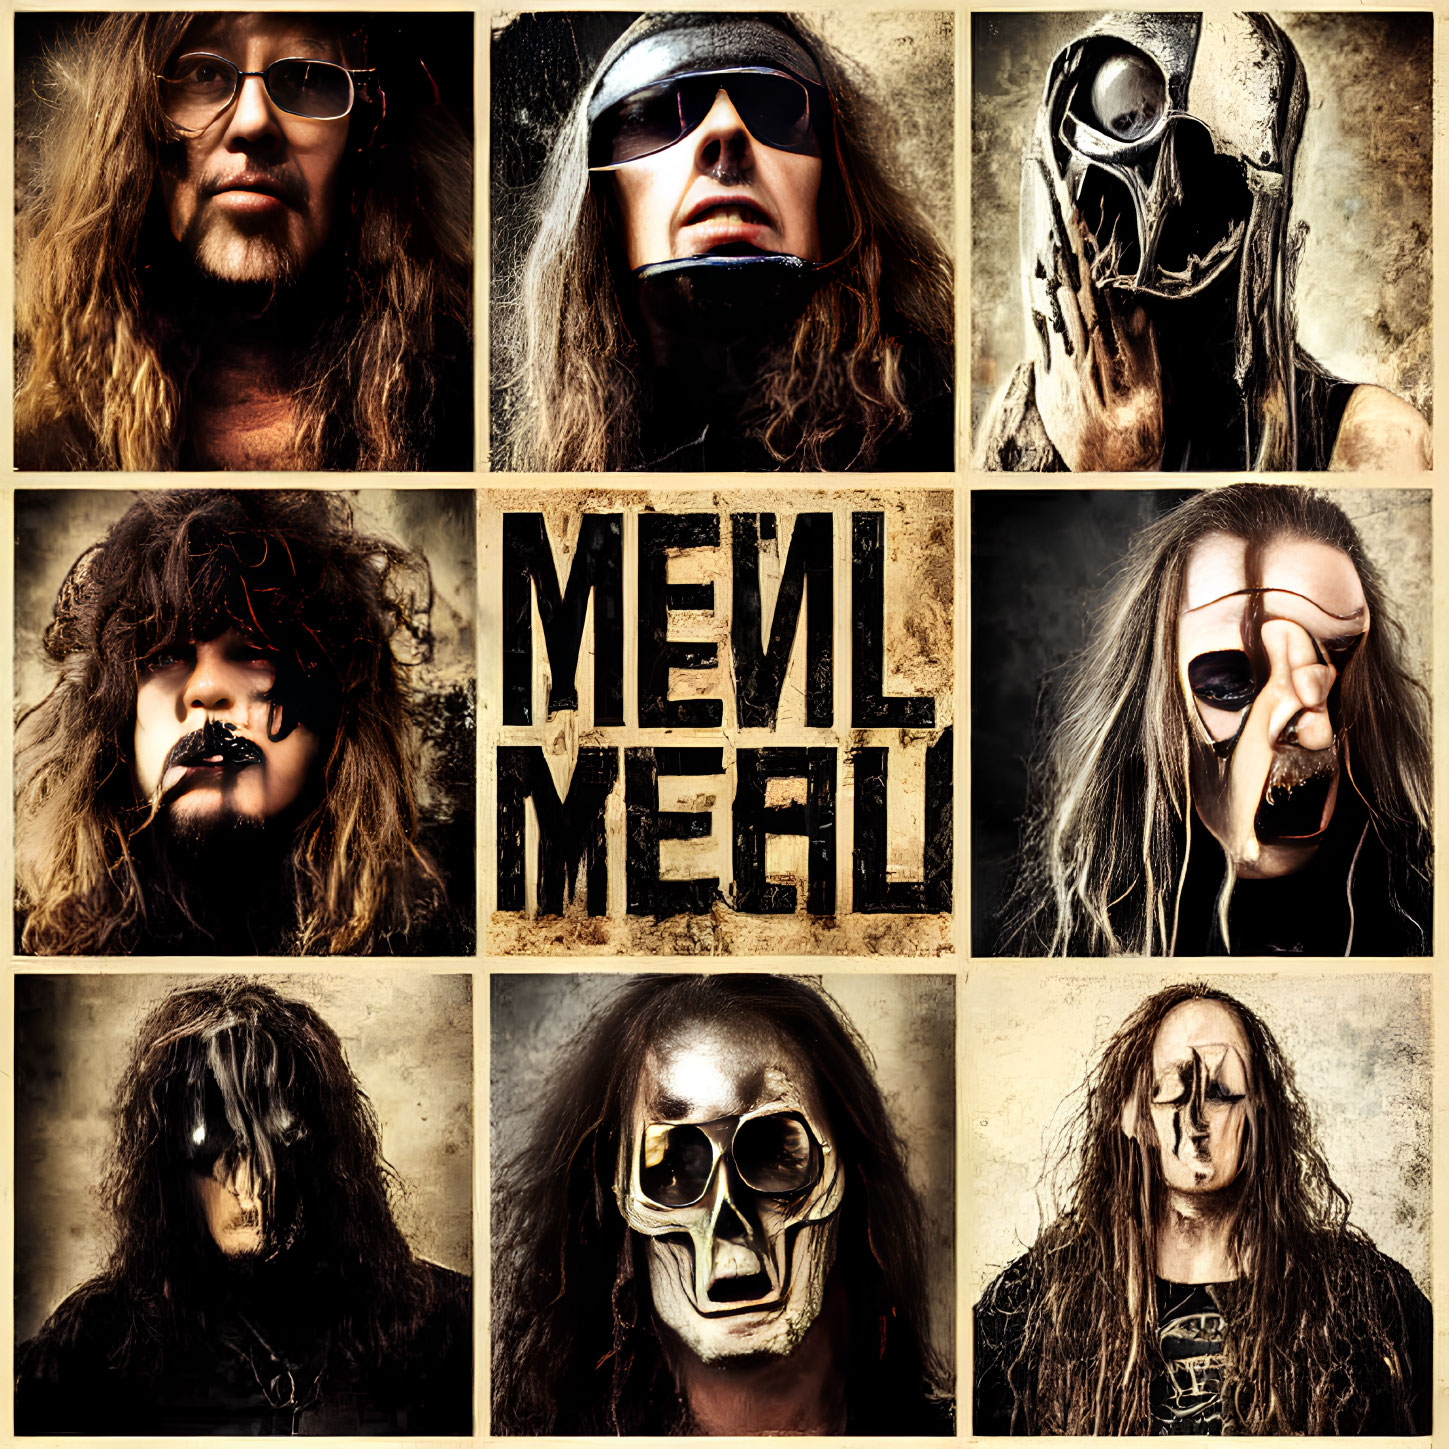 Collage of Nine Intense Portraits with Diverse Appearances and "METAL" Caption